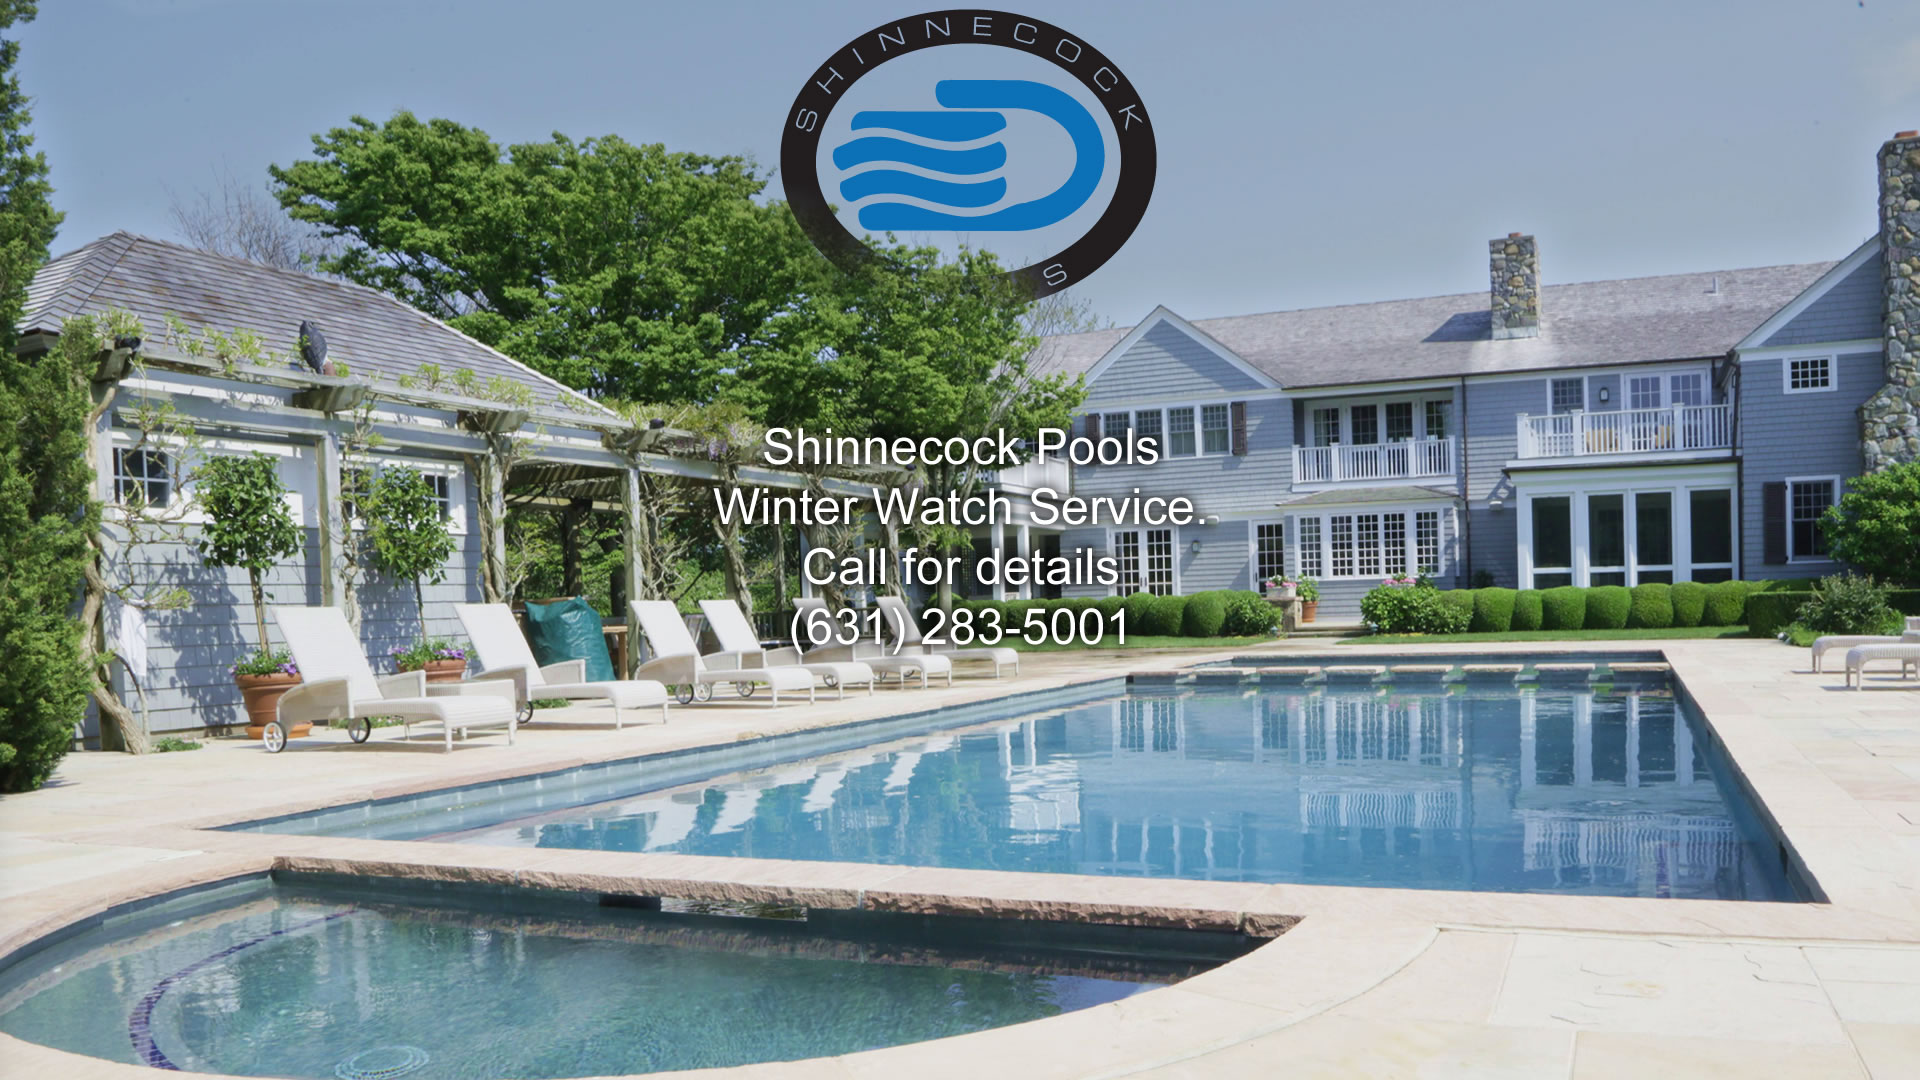 Shinnecock Pools Winter Watch Service, Call for details